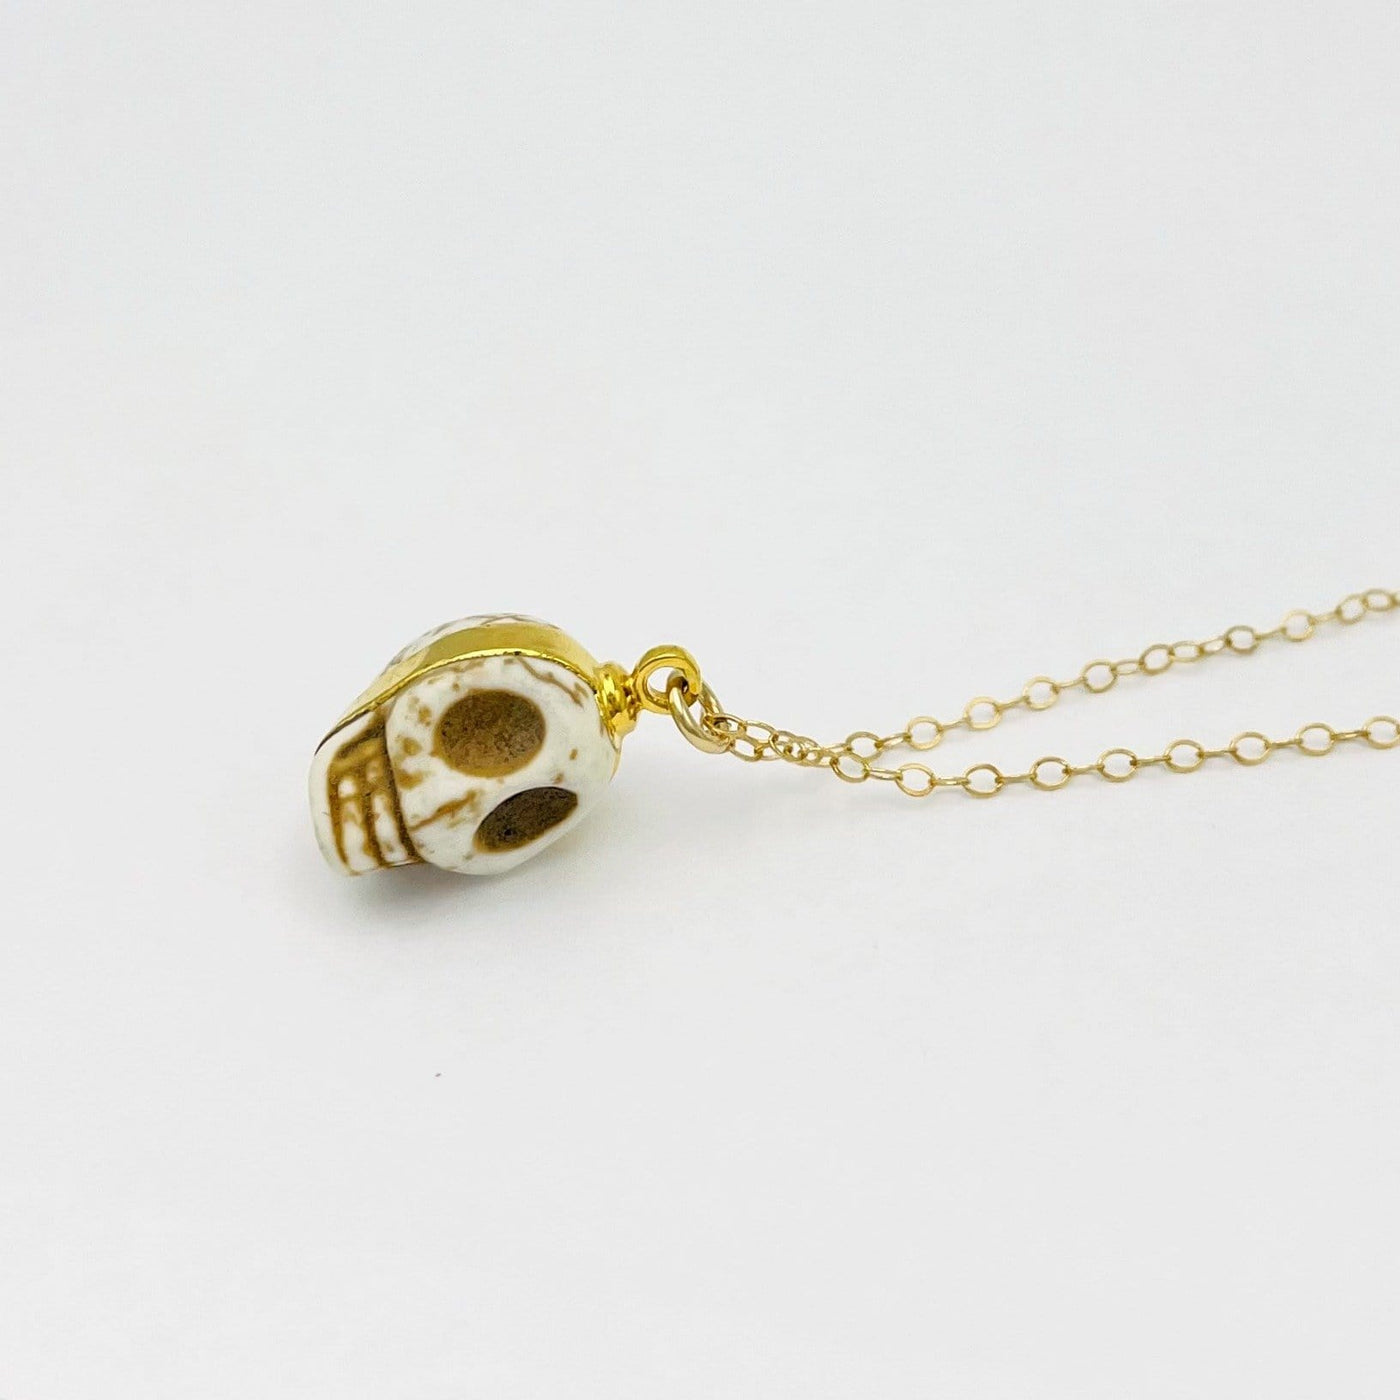 white howlite skull pendant necklace laying on its side on white background